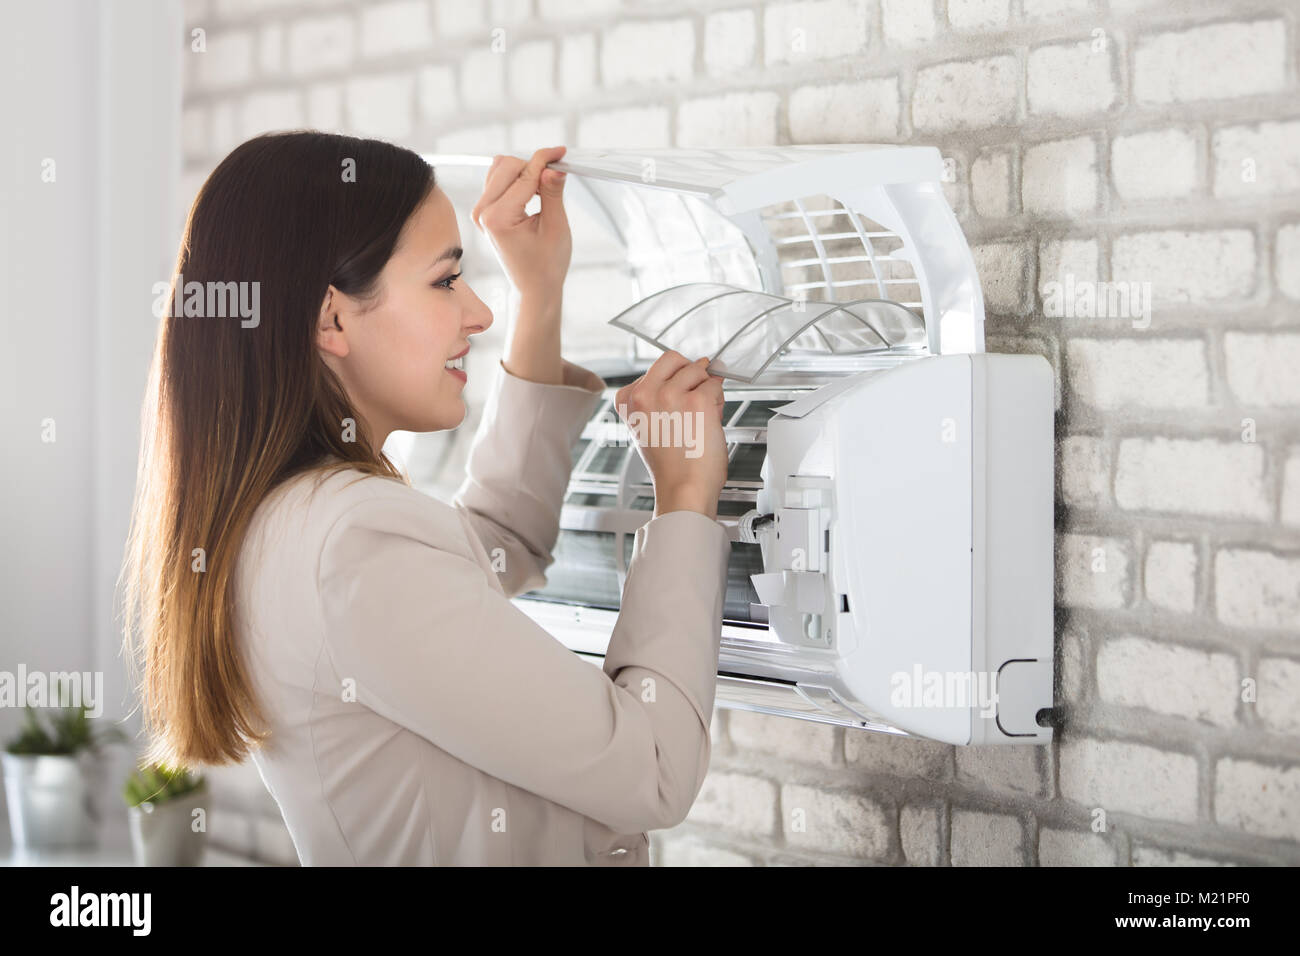 Young Smiling Woman Cleaning The Air Conditioner Attached On Wall Stock Photo